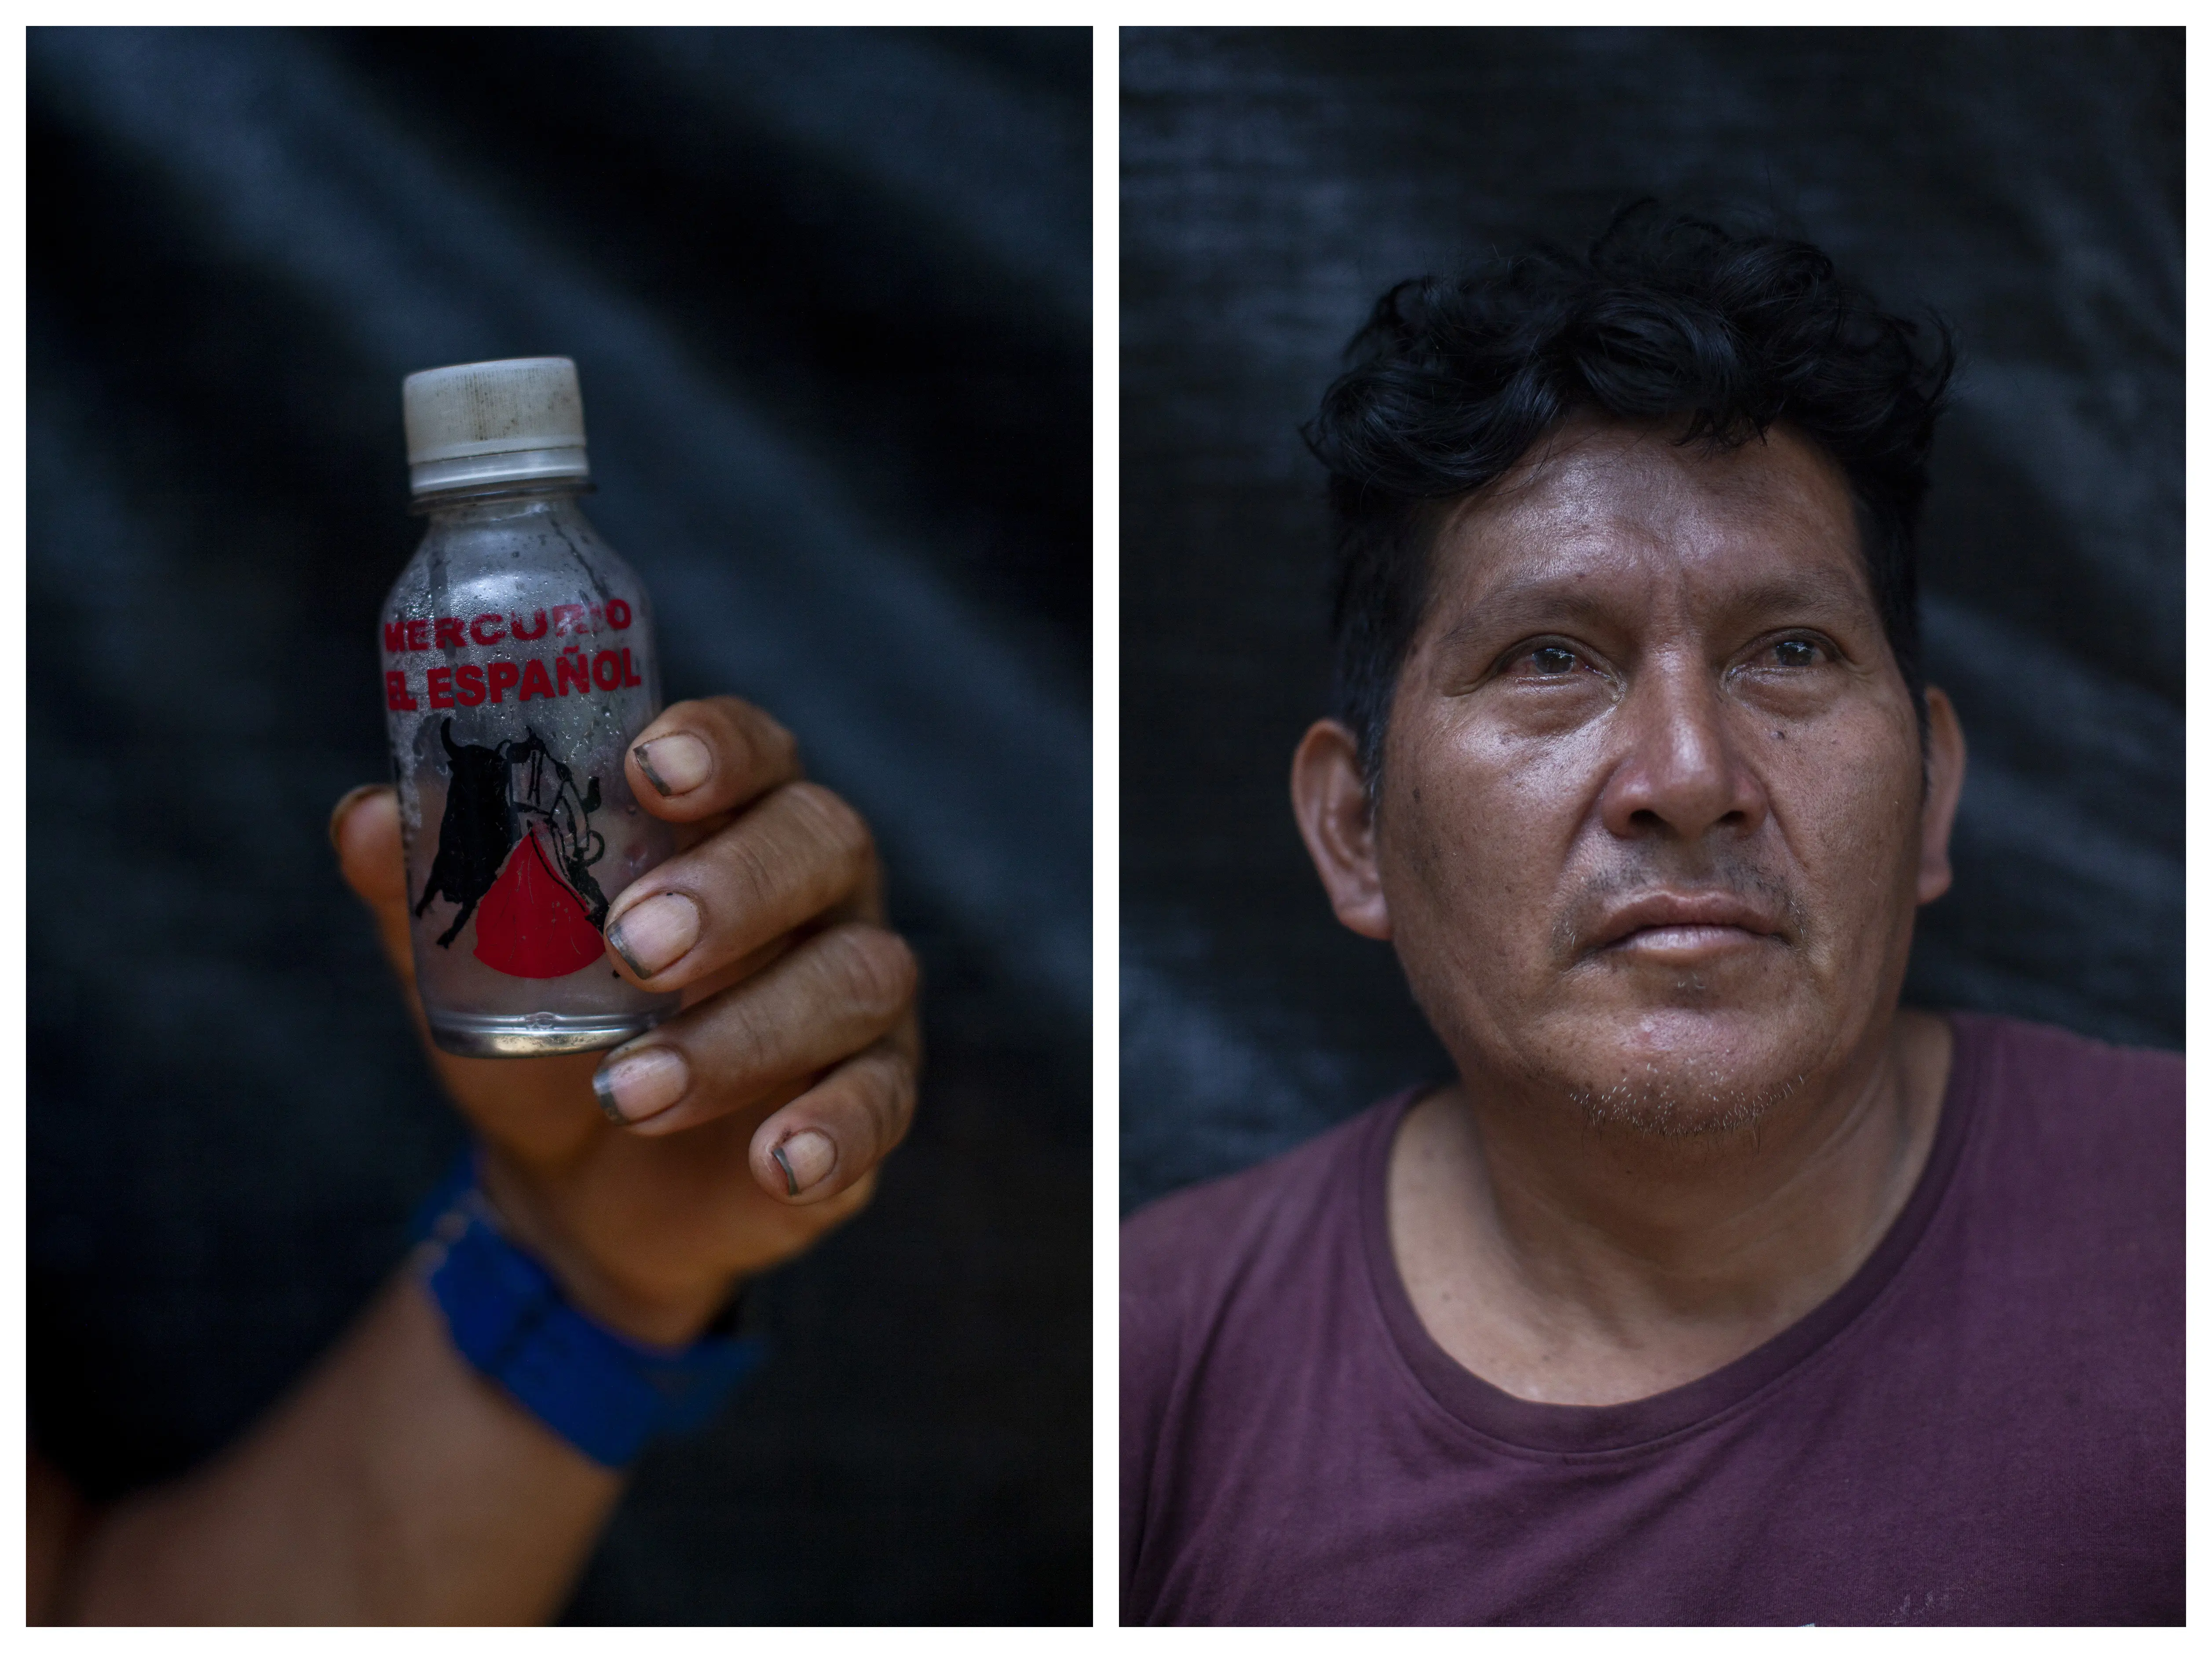 Left: a plastic bottle with a graphic bull and red cape containing "Mercurio El Español." Right: a headshot of Ruben Timelensuki.